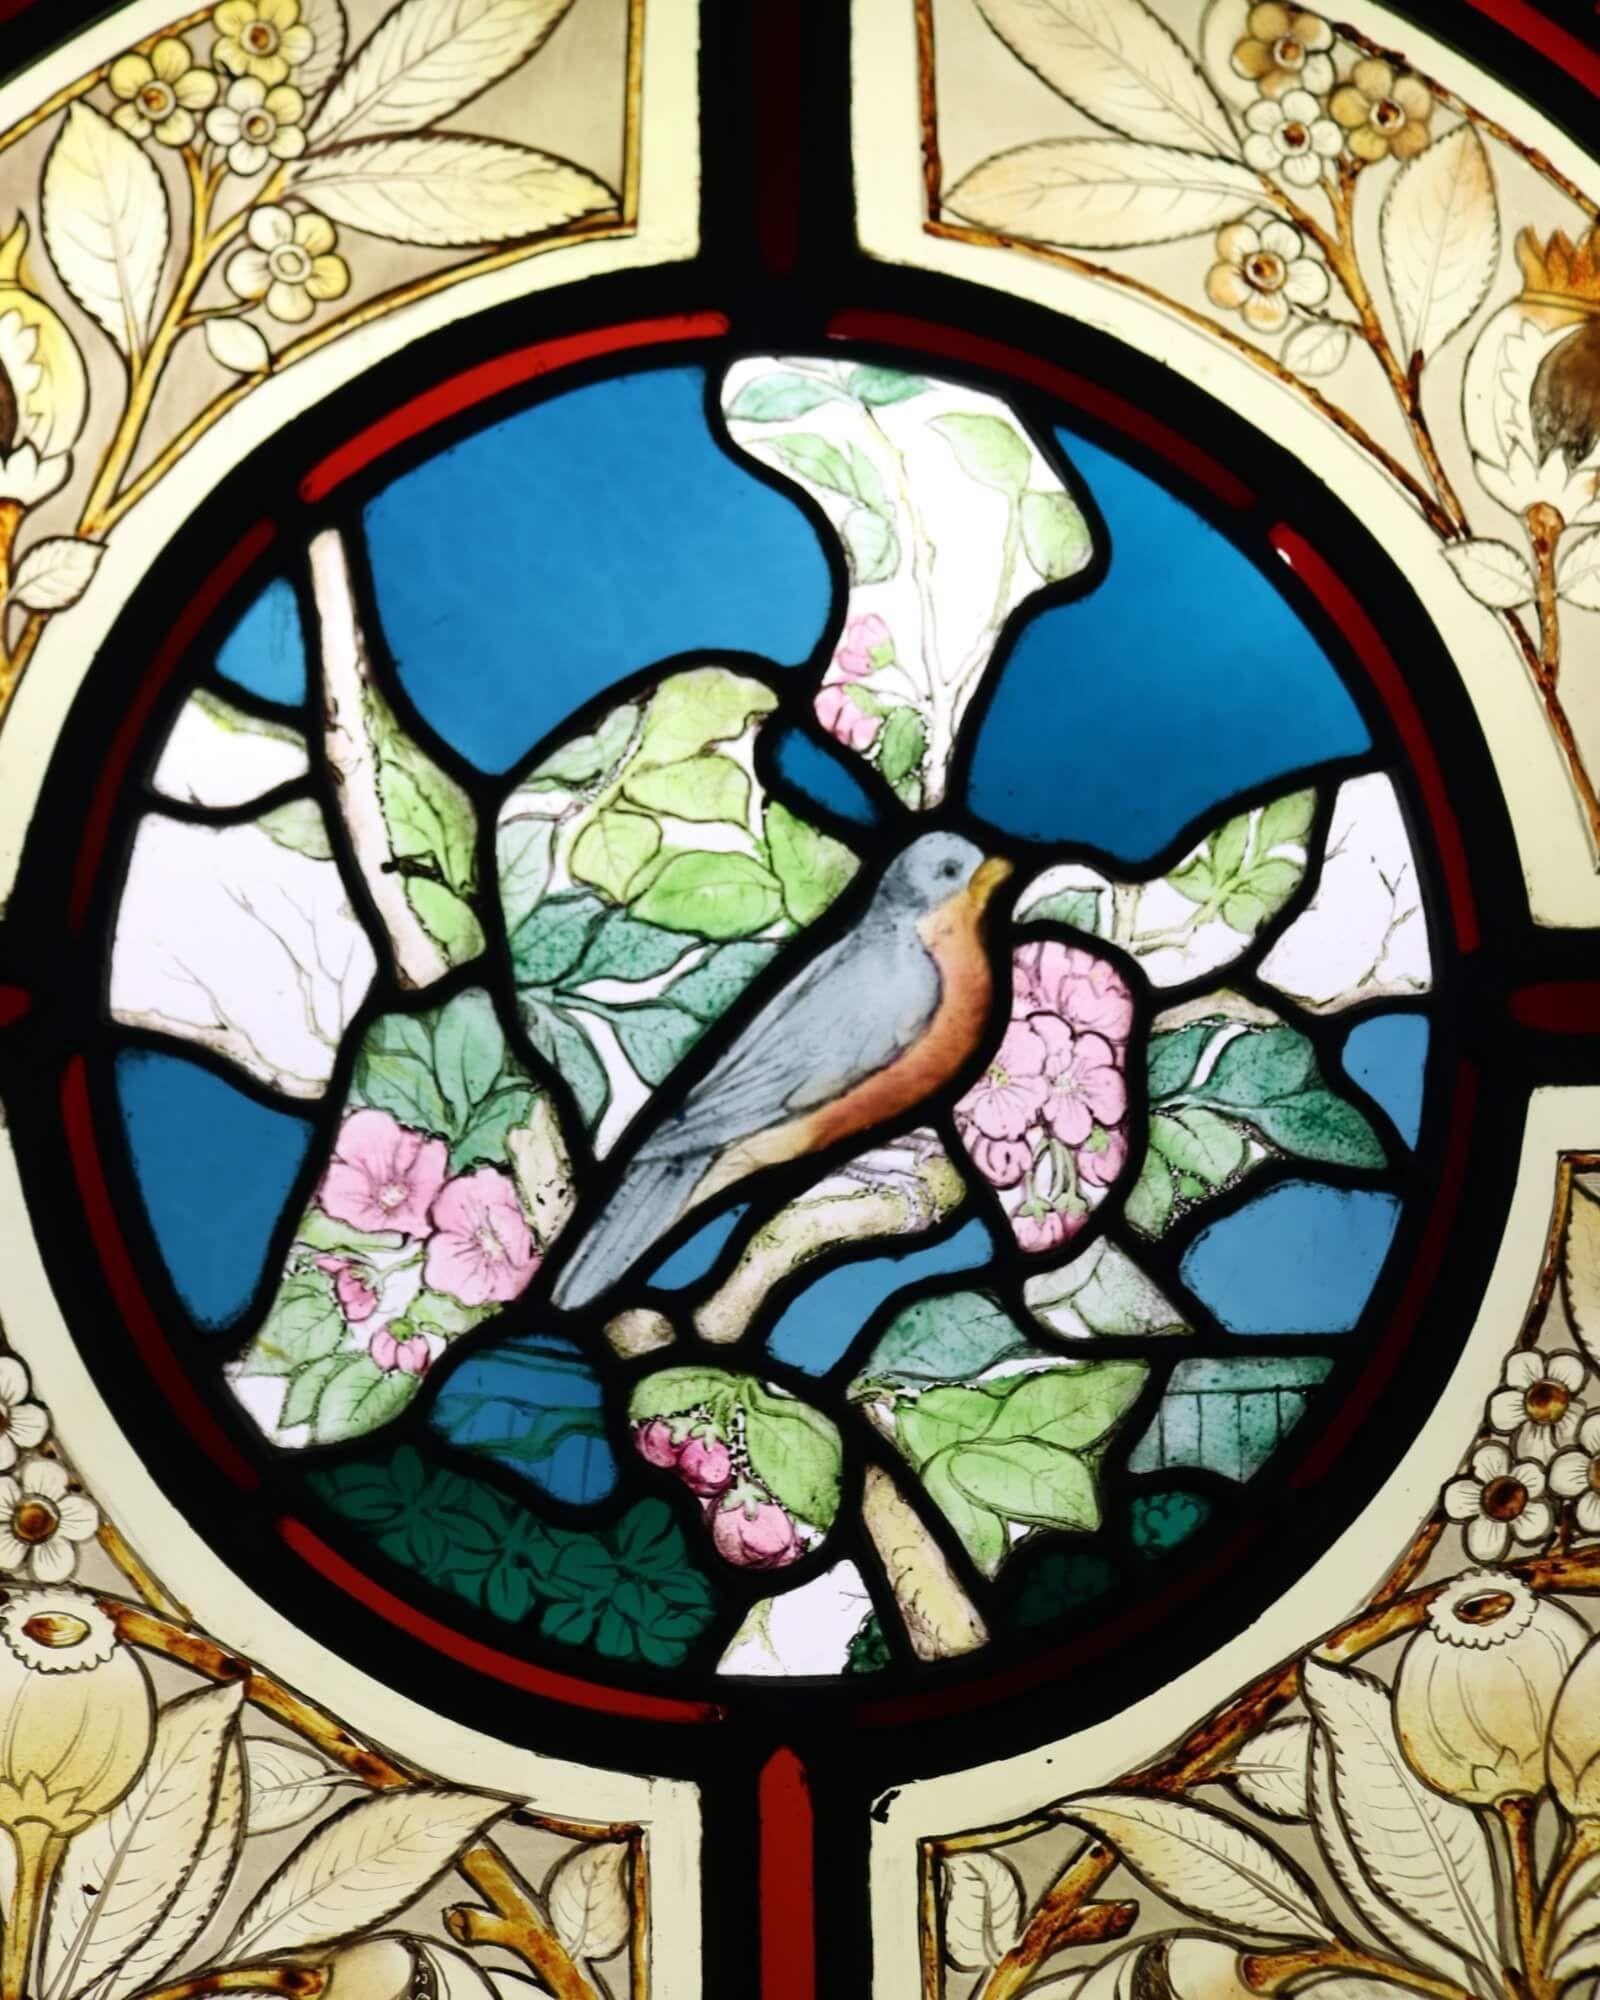 An antique arched stained glass window attractively decorated with a bird, possibly a nuthatch, and fruiting foliage surrounded by a panel of stylised roses and thorns. This beautiful window dates from the late 19th century yet it’s vibrant colours